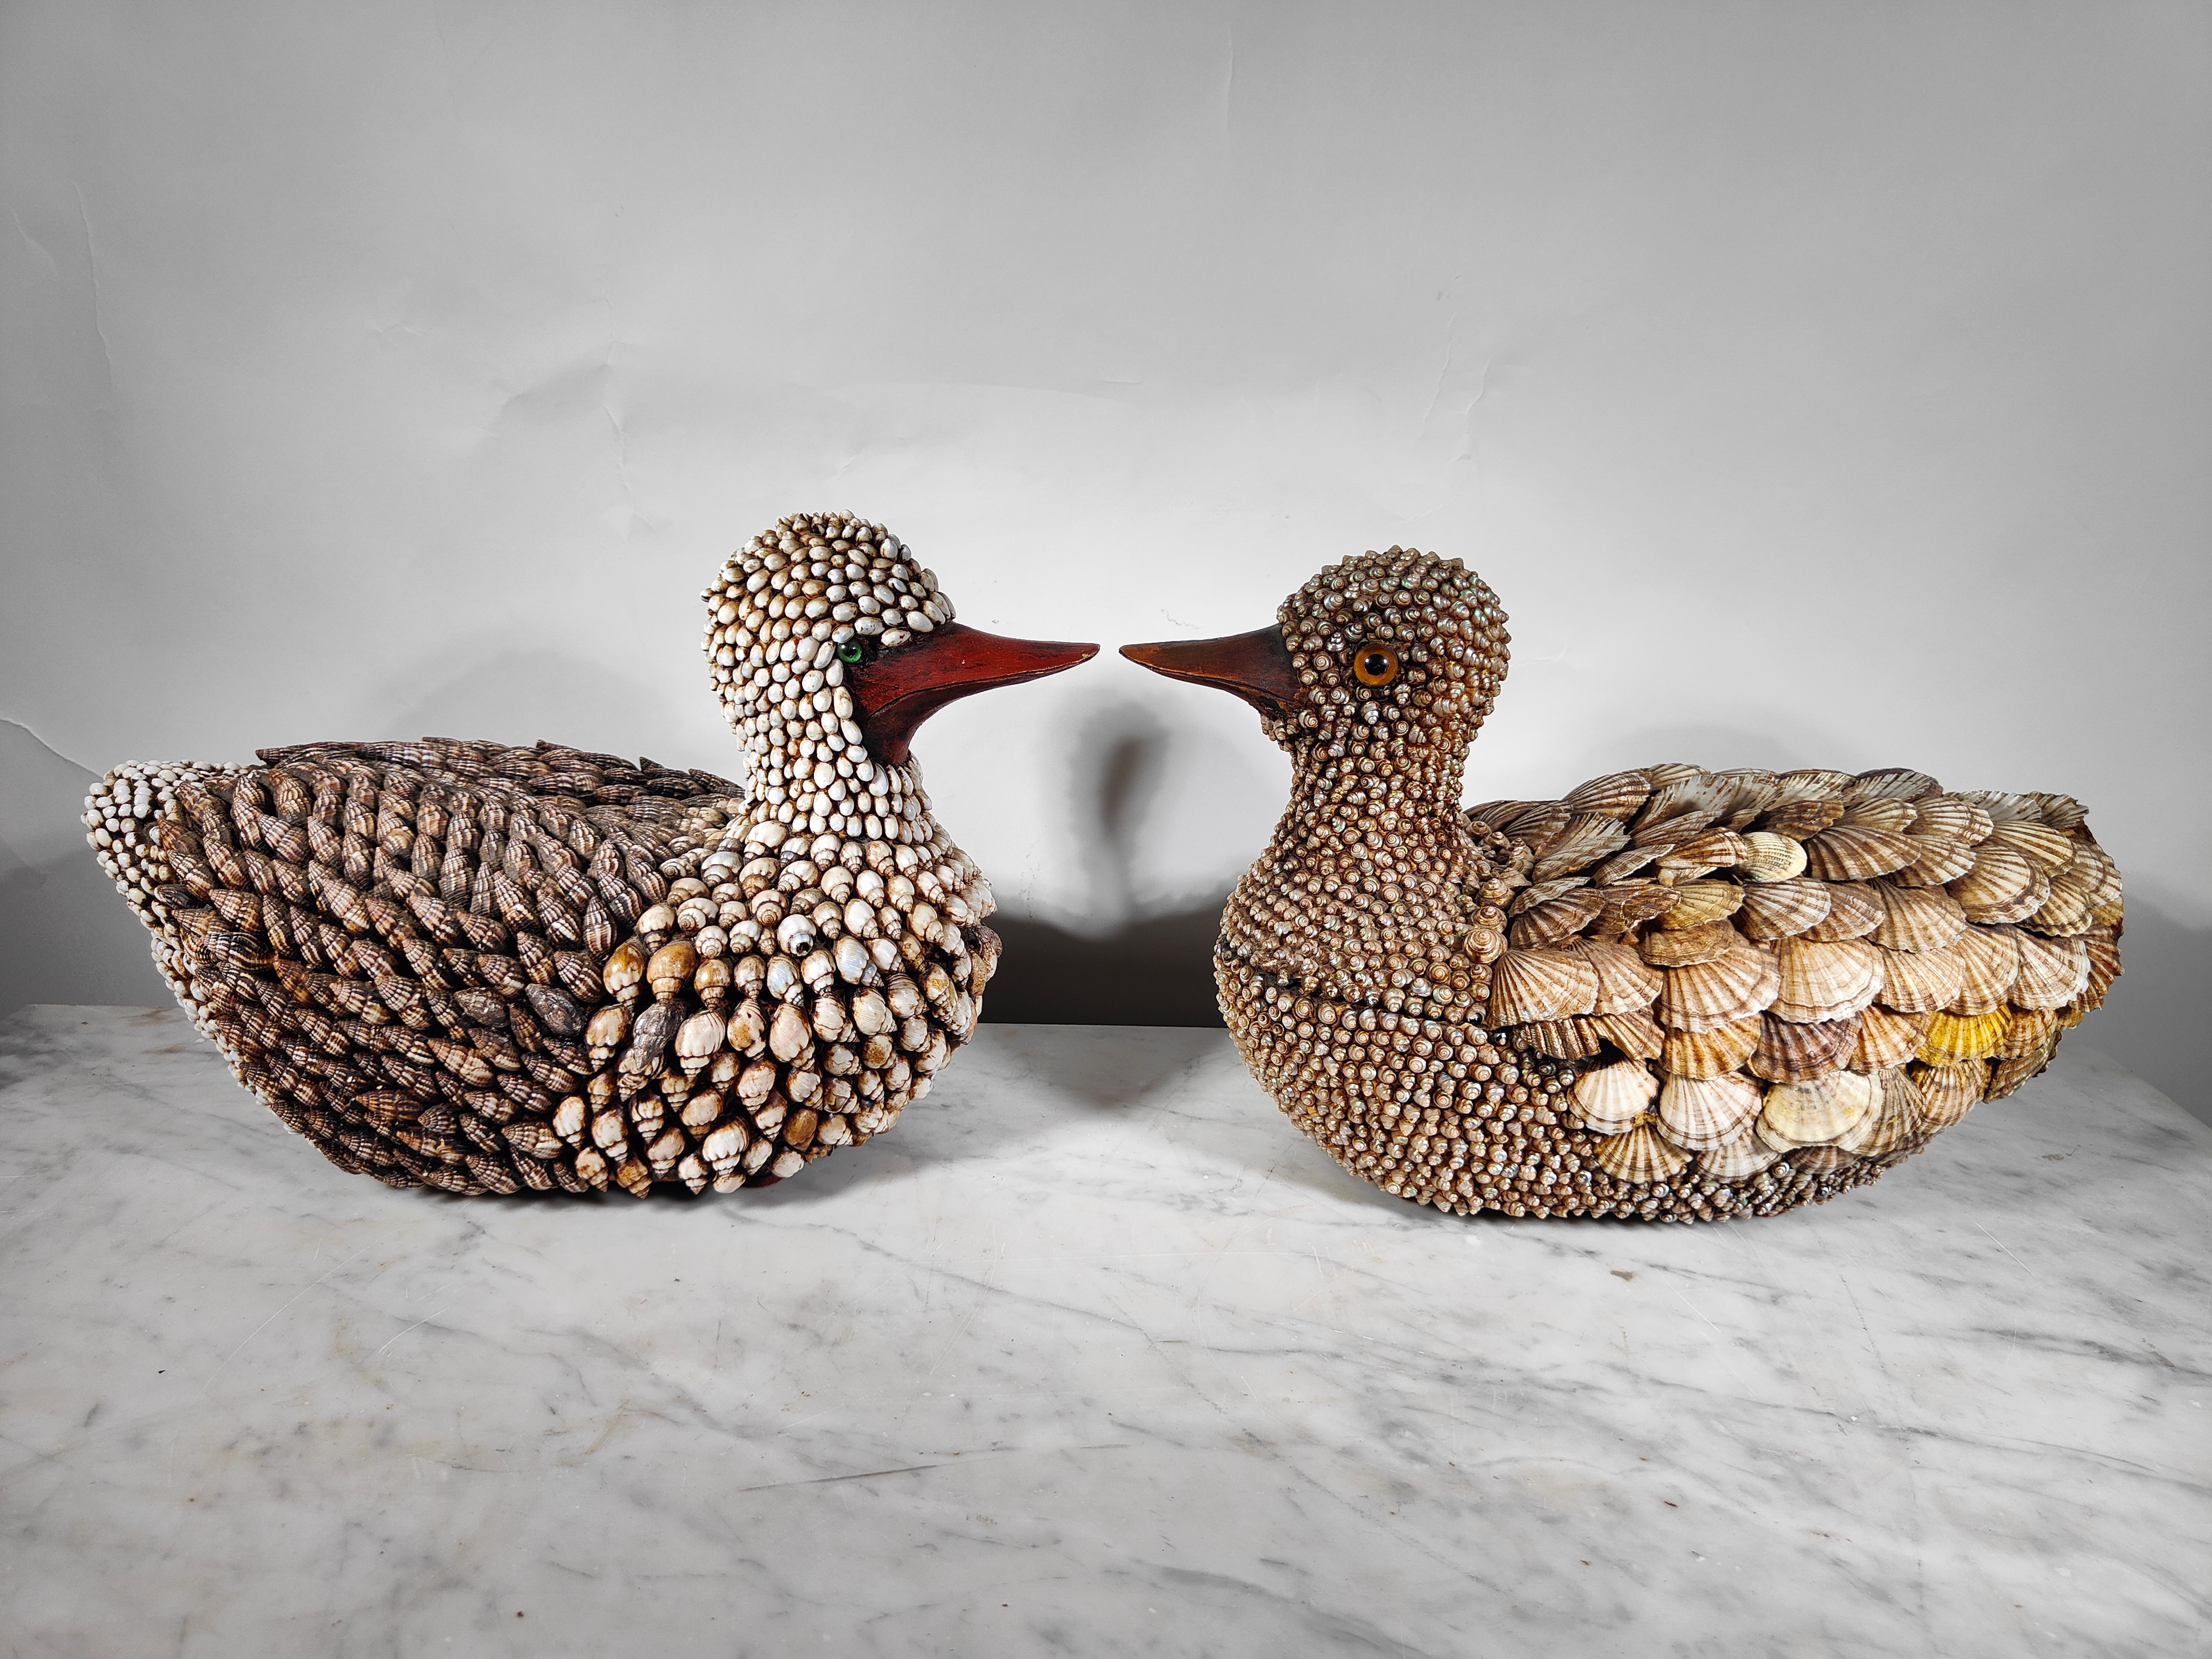 Anthony Redmile shell encrusted ducks boxes.
Beautiful rare Anthony Redmile shell encrusted r ducks form box, 20th century
A pair. Size :40X25X20 cm.